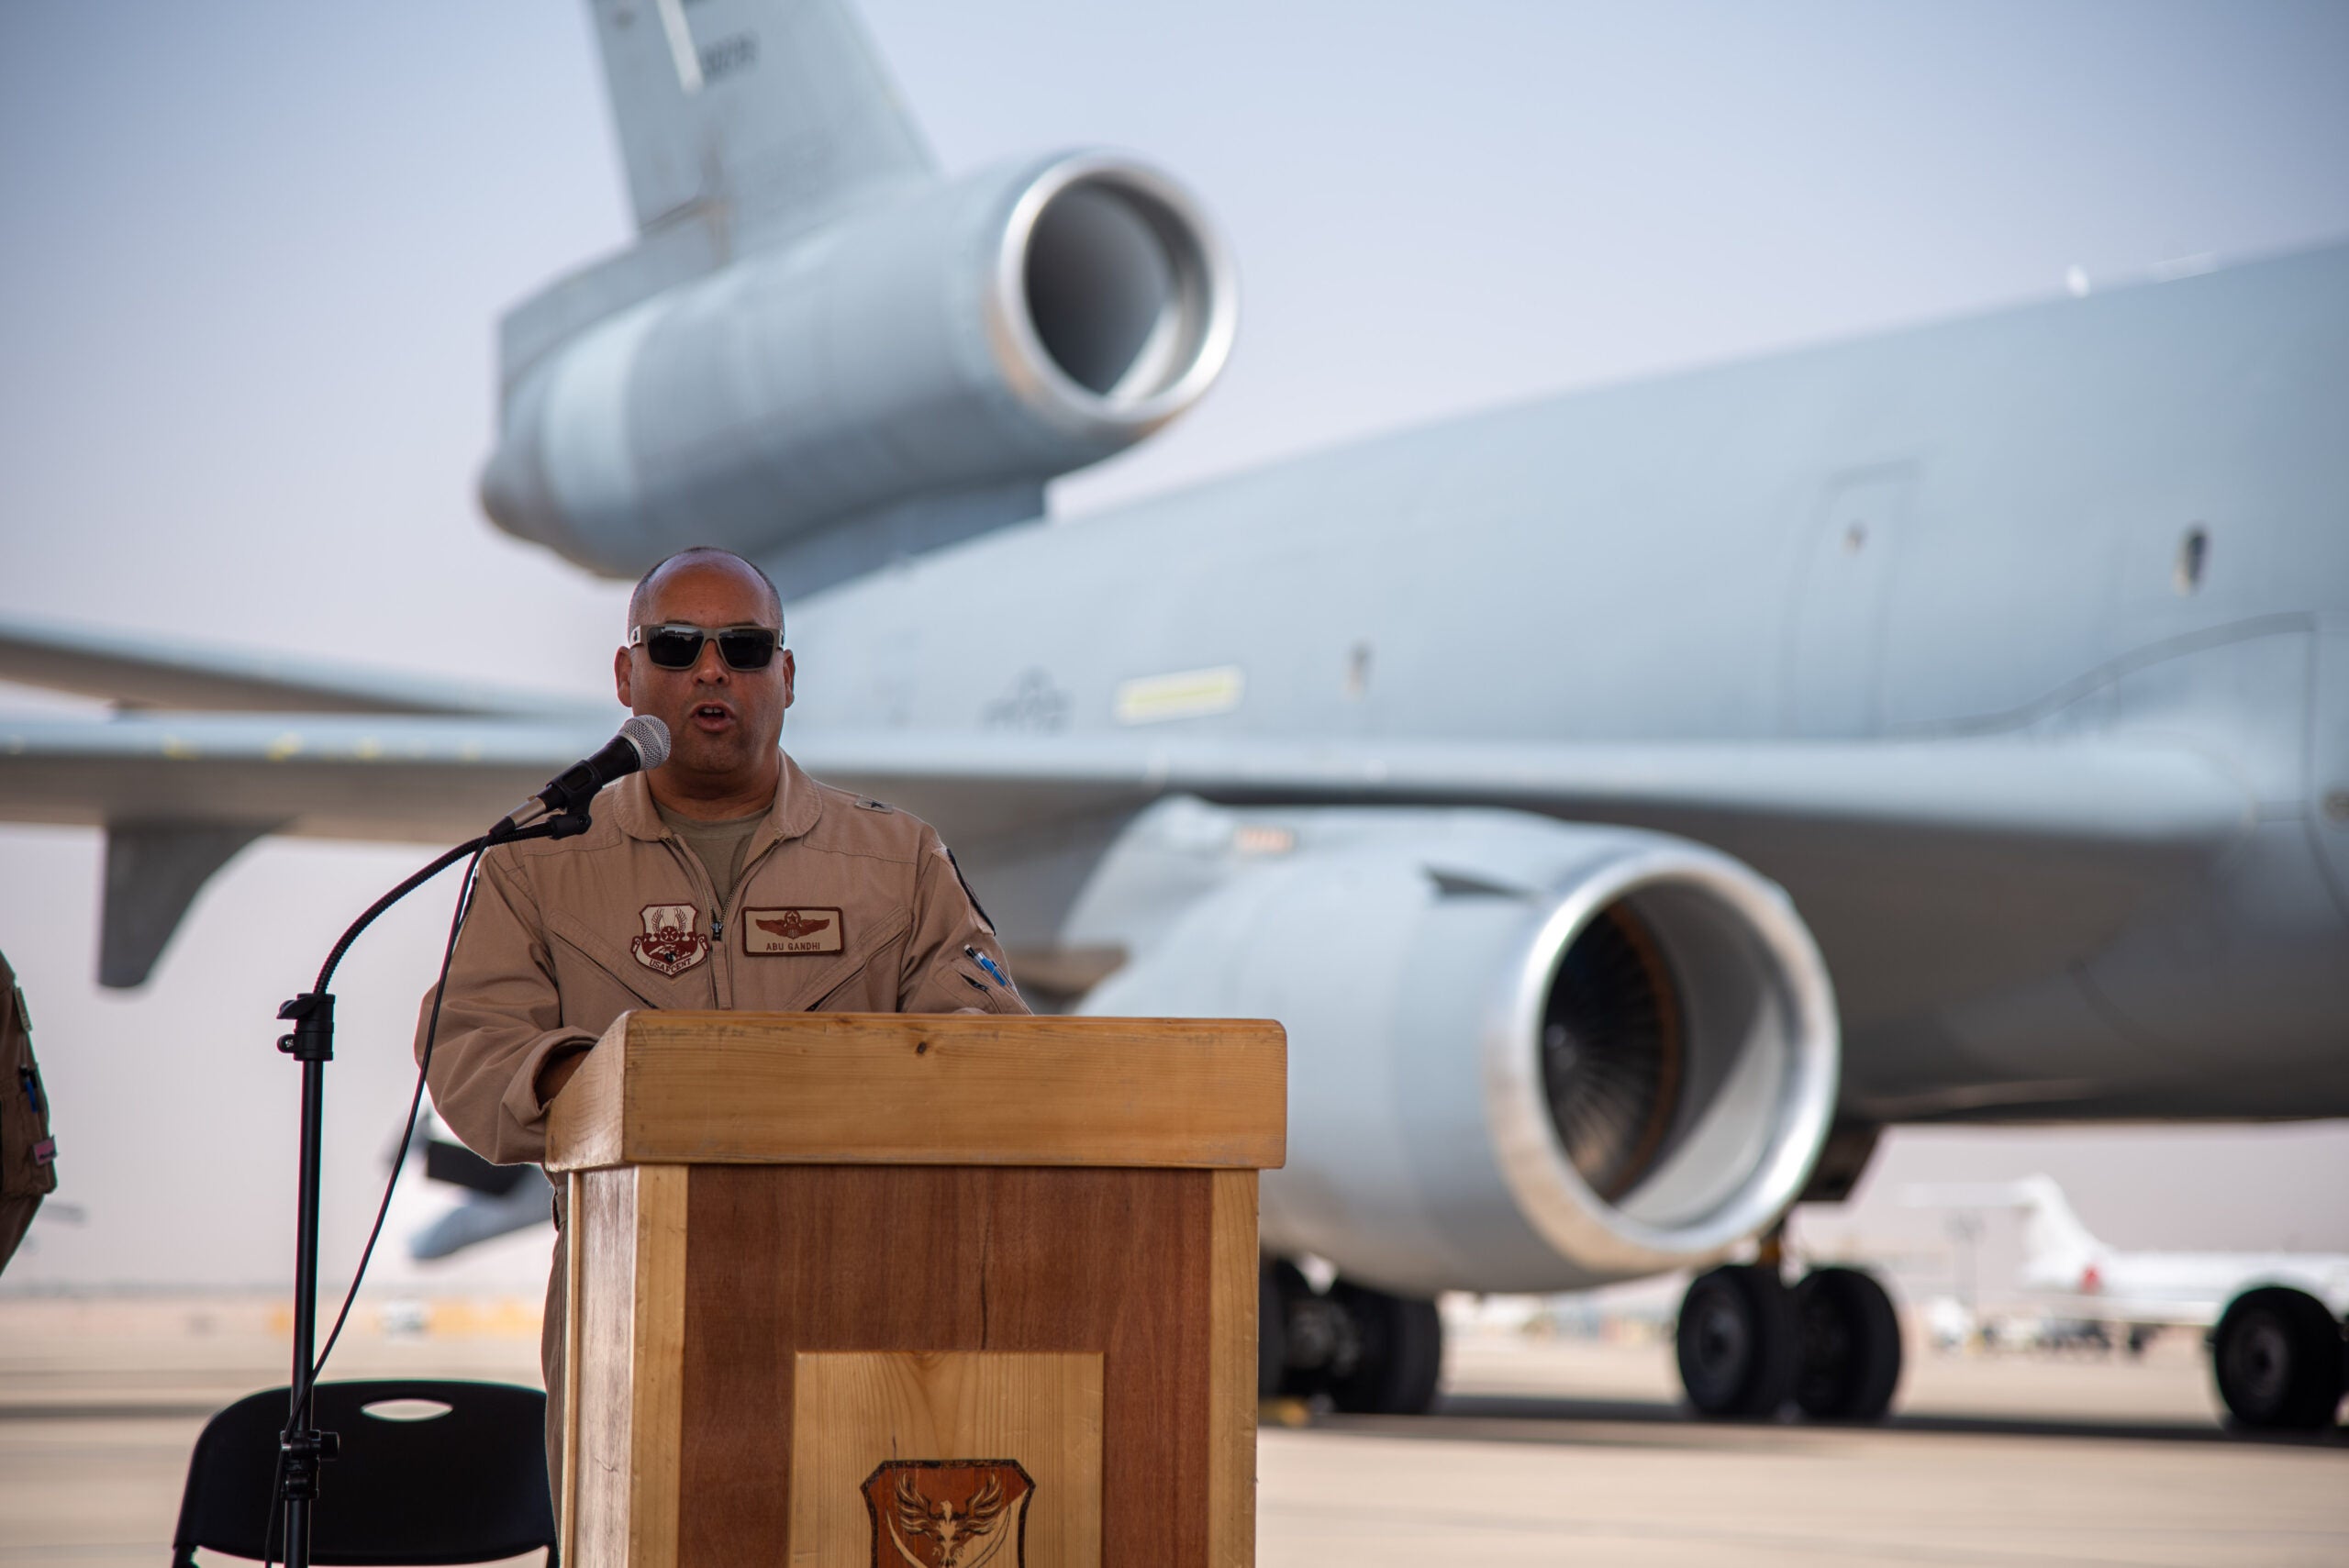 U.S. Air Force Brig. Gen. Akshai Gandhi, 378th Air Expeditionary Wing commander, delivers his remarks during the inactivation ceremony for the 908th Expeditionary Air Refueling Squadron at Prince Sultan Air Base, Kingdom of Saudi Arabia, Oct. 4, 2023. The ceremony highlighted the legacy of the KC-10 after over 30 years of service within the U.S. Air Forces Central (AFCENT) Area of Responsibility. By September 2024, the U.S. Air Force's fleet of KC-10s will be decommissioned and gradually replaced by the KC-46 aircraft. (U.S. Air Force photo by Tech. Sgt. Alexander Frank)